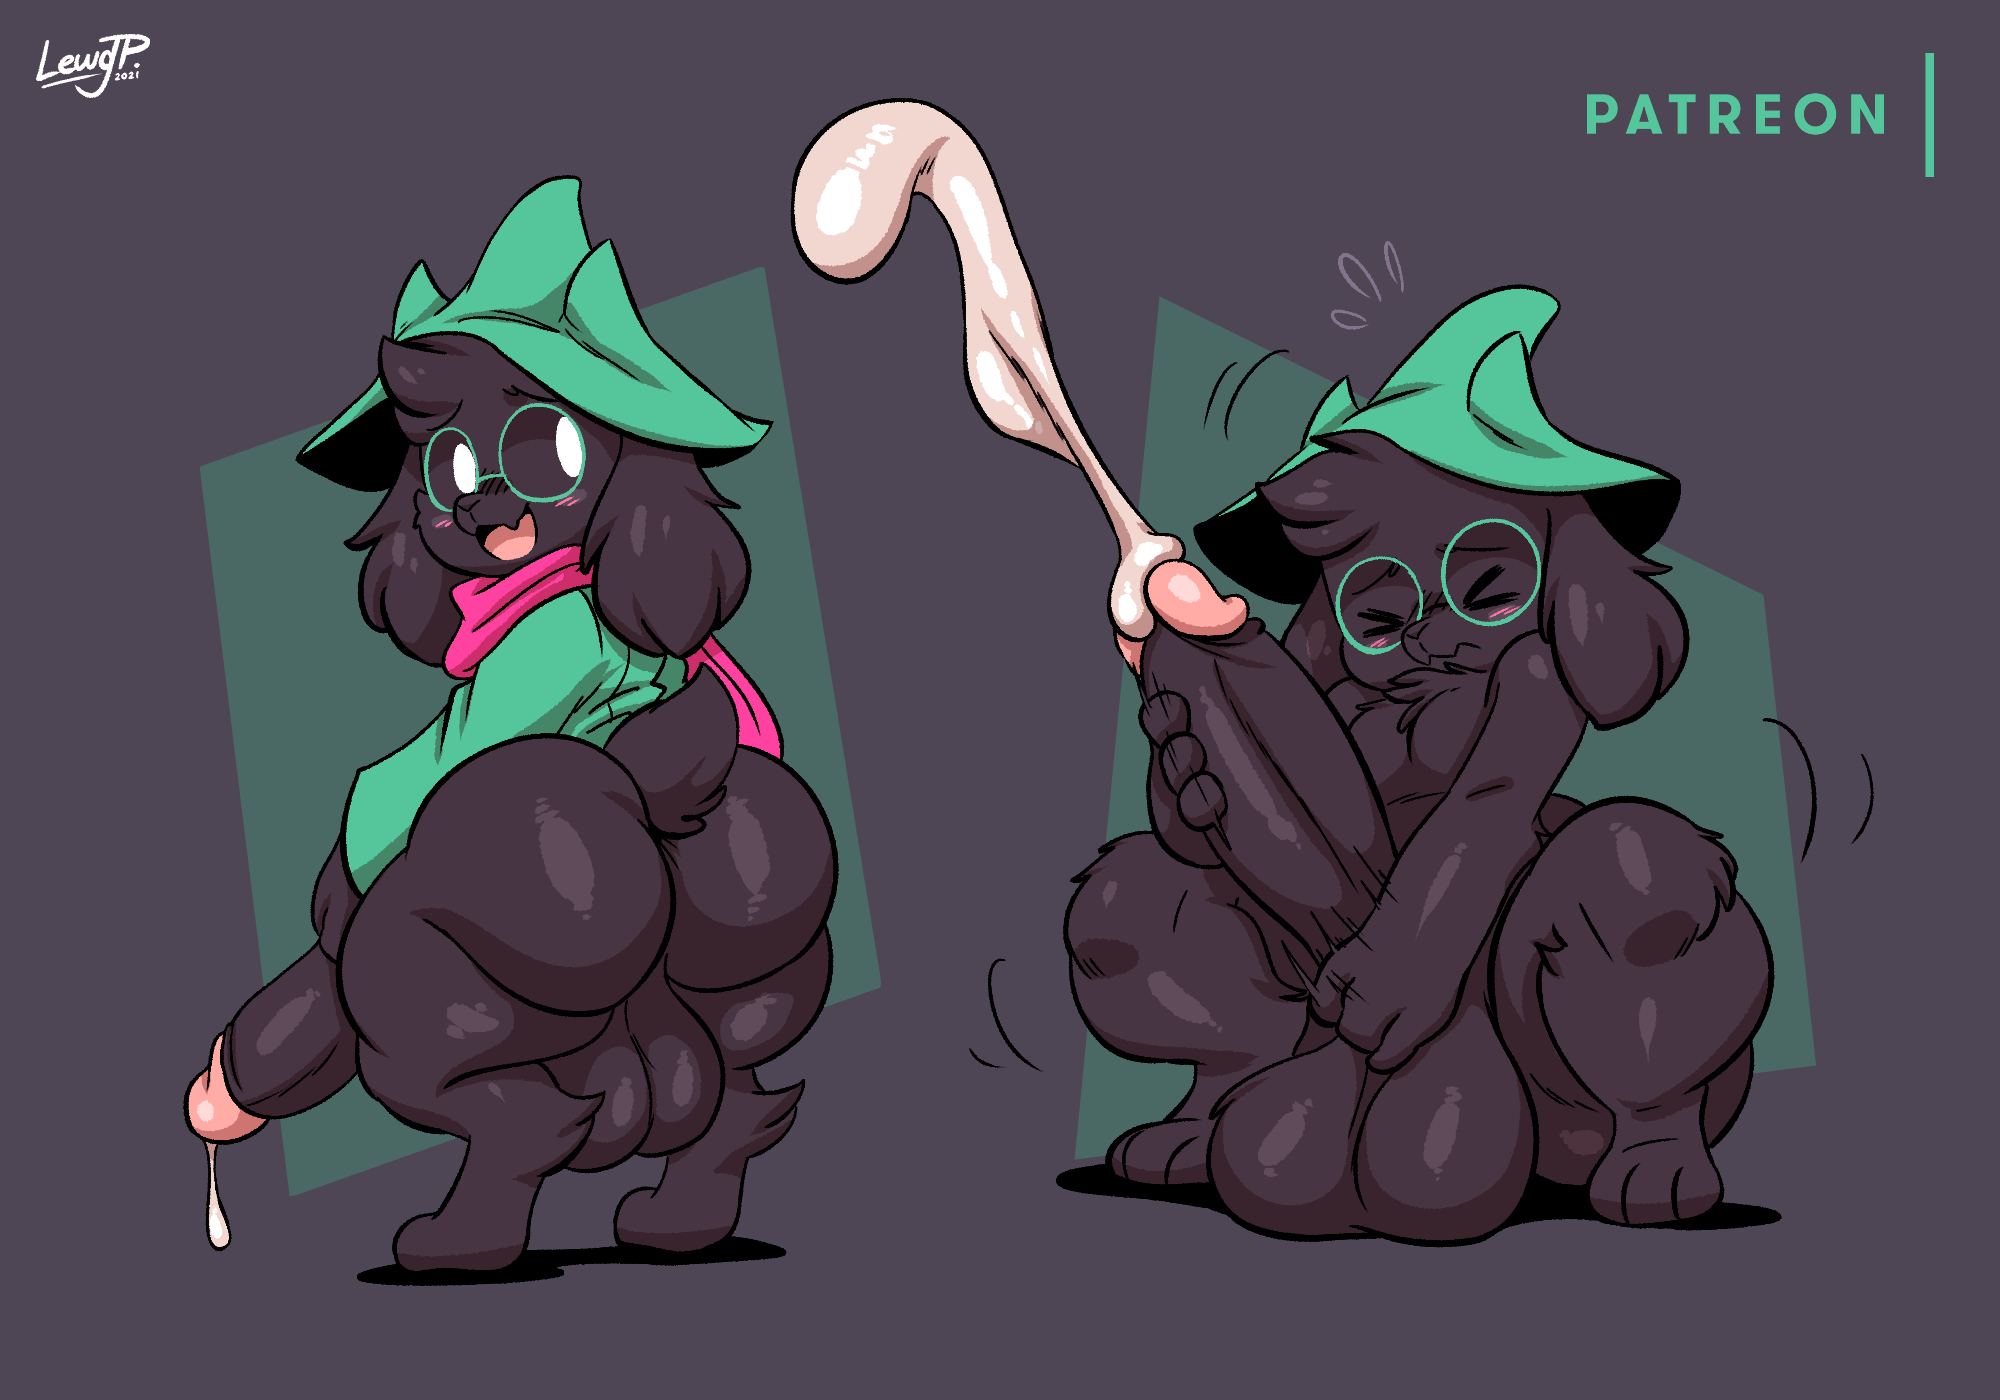 Sensational ralsei takes a mighty rod up his butt